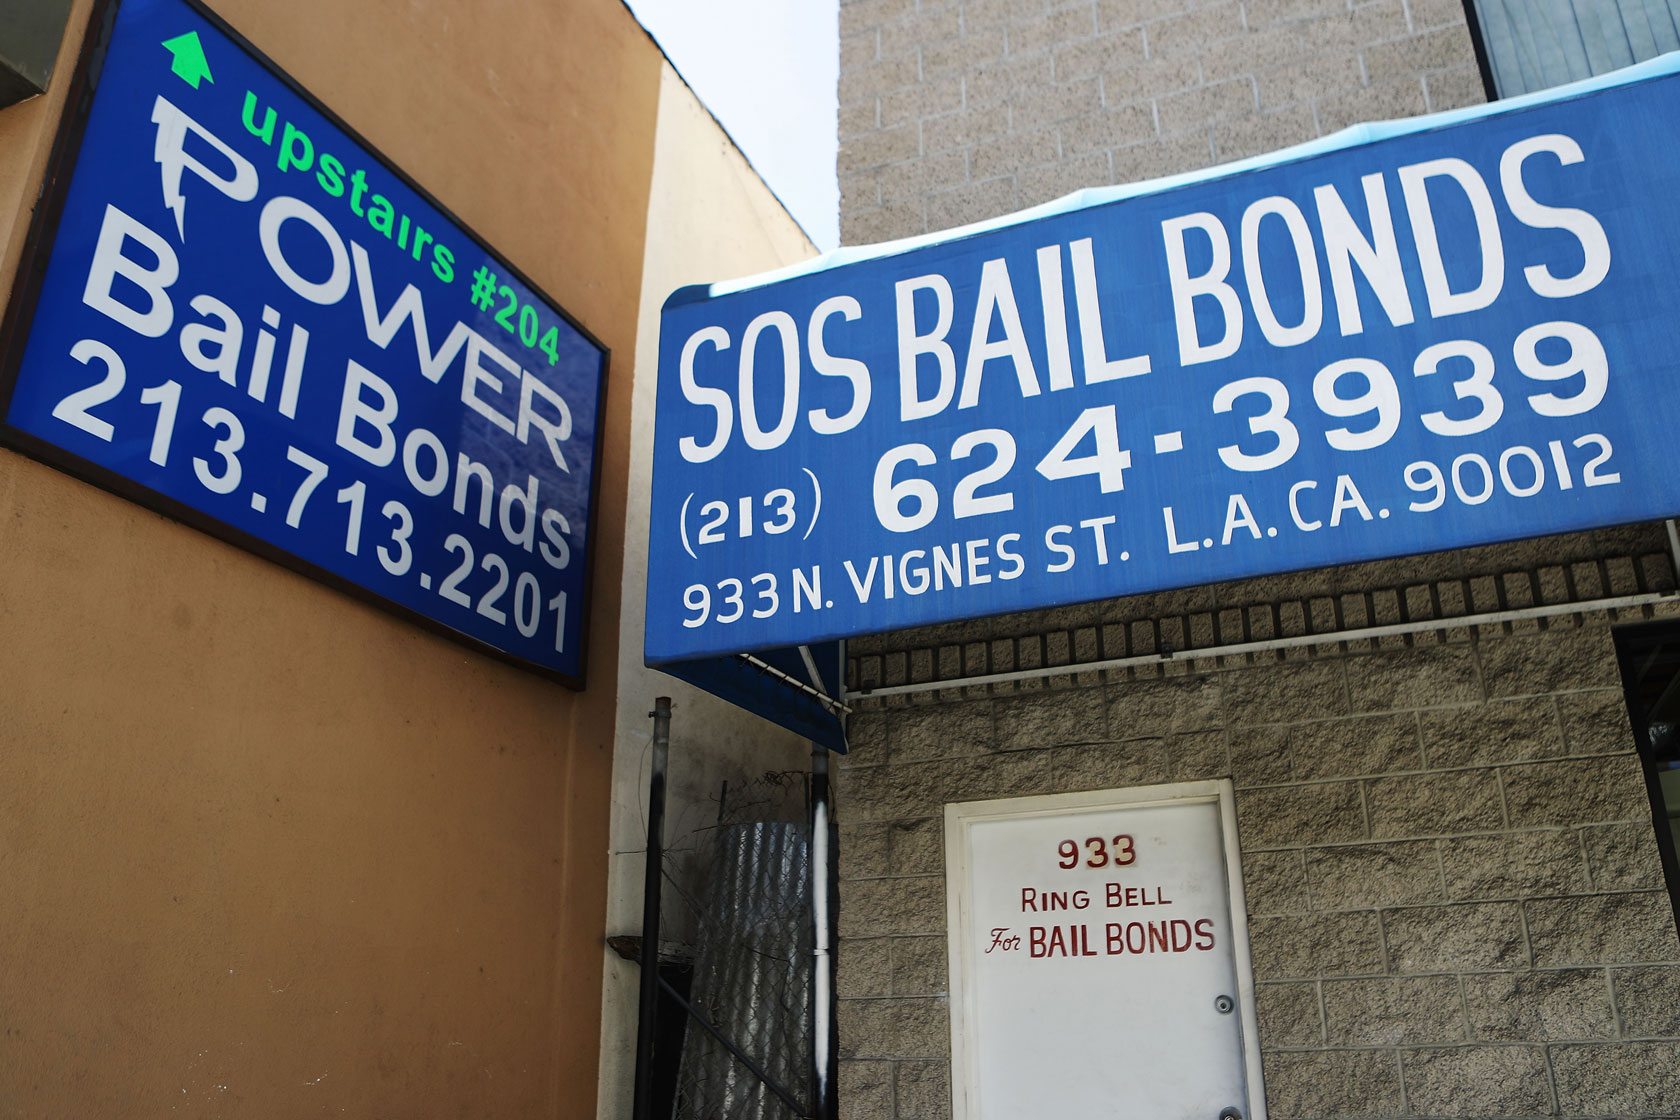 Photo shows two blue signs on the side of a building advertising bail bonds, displaying the companies' phone numbers.